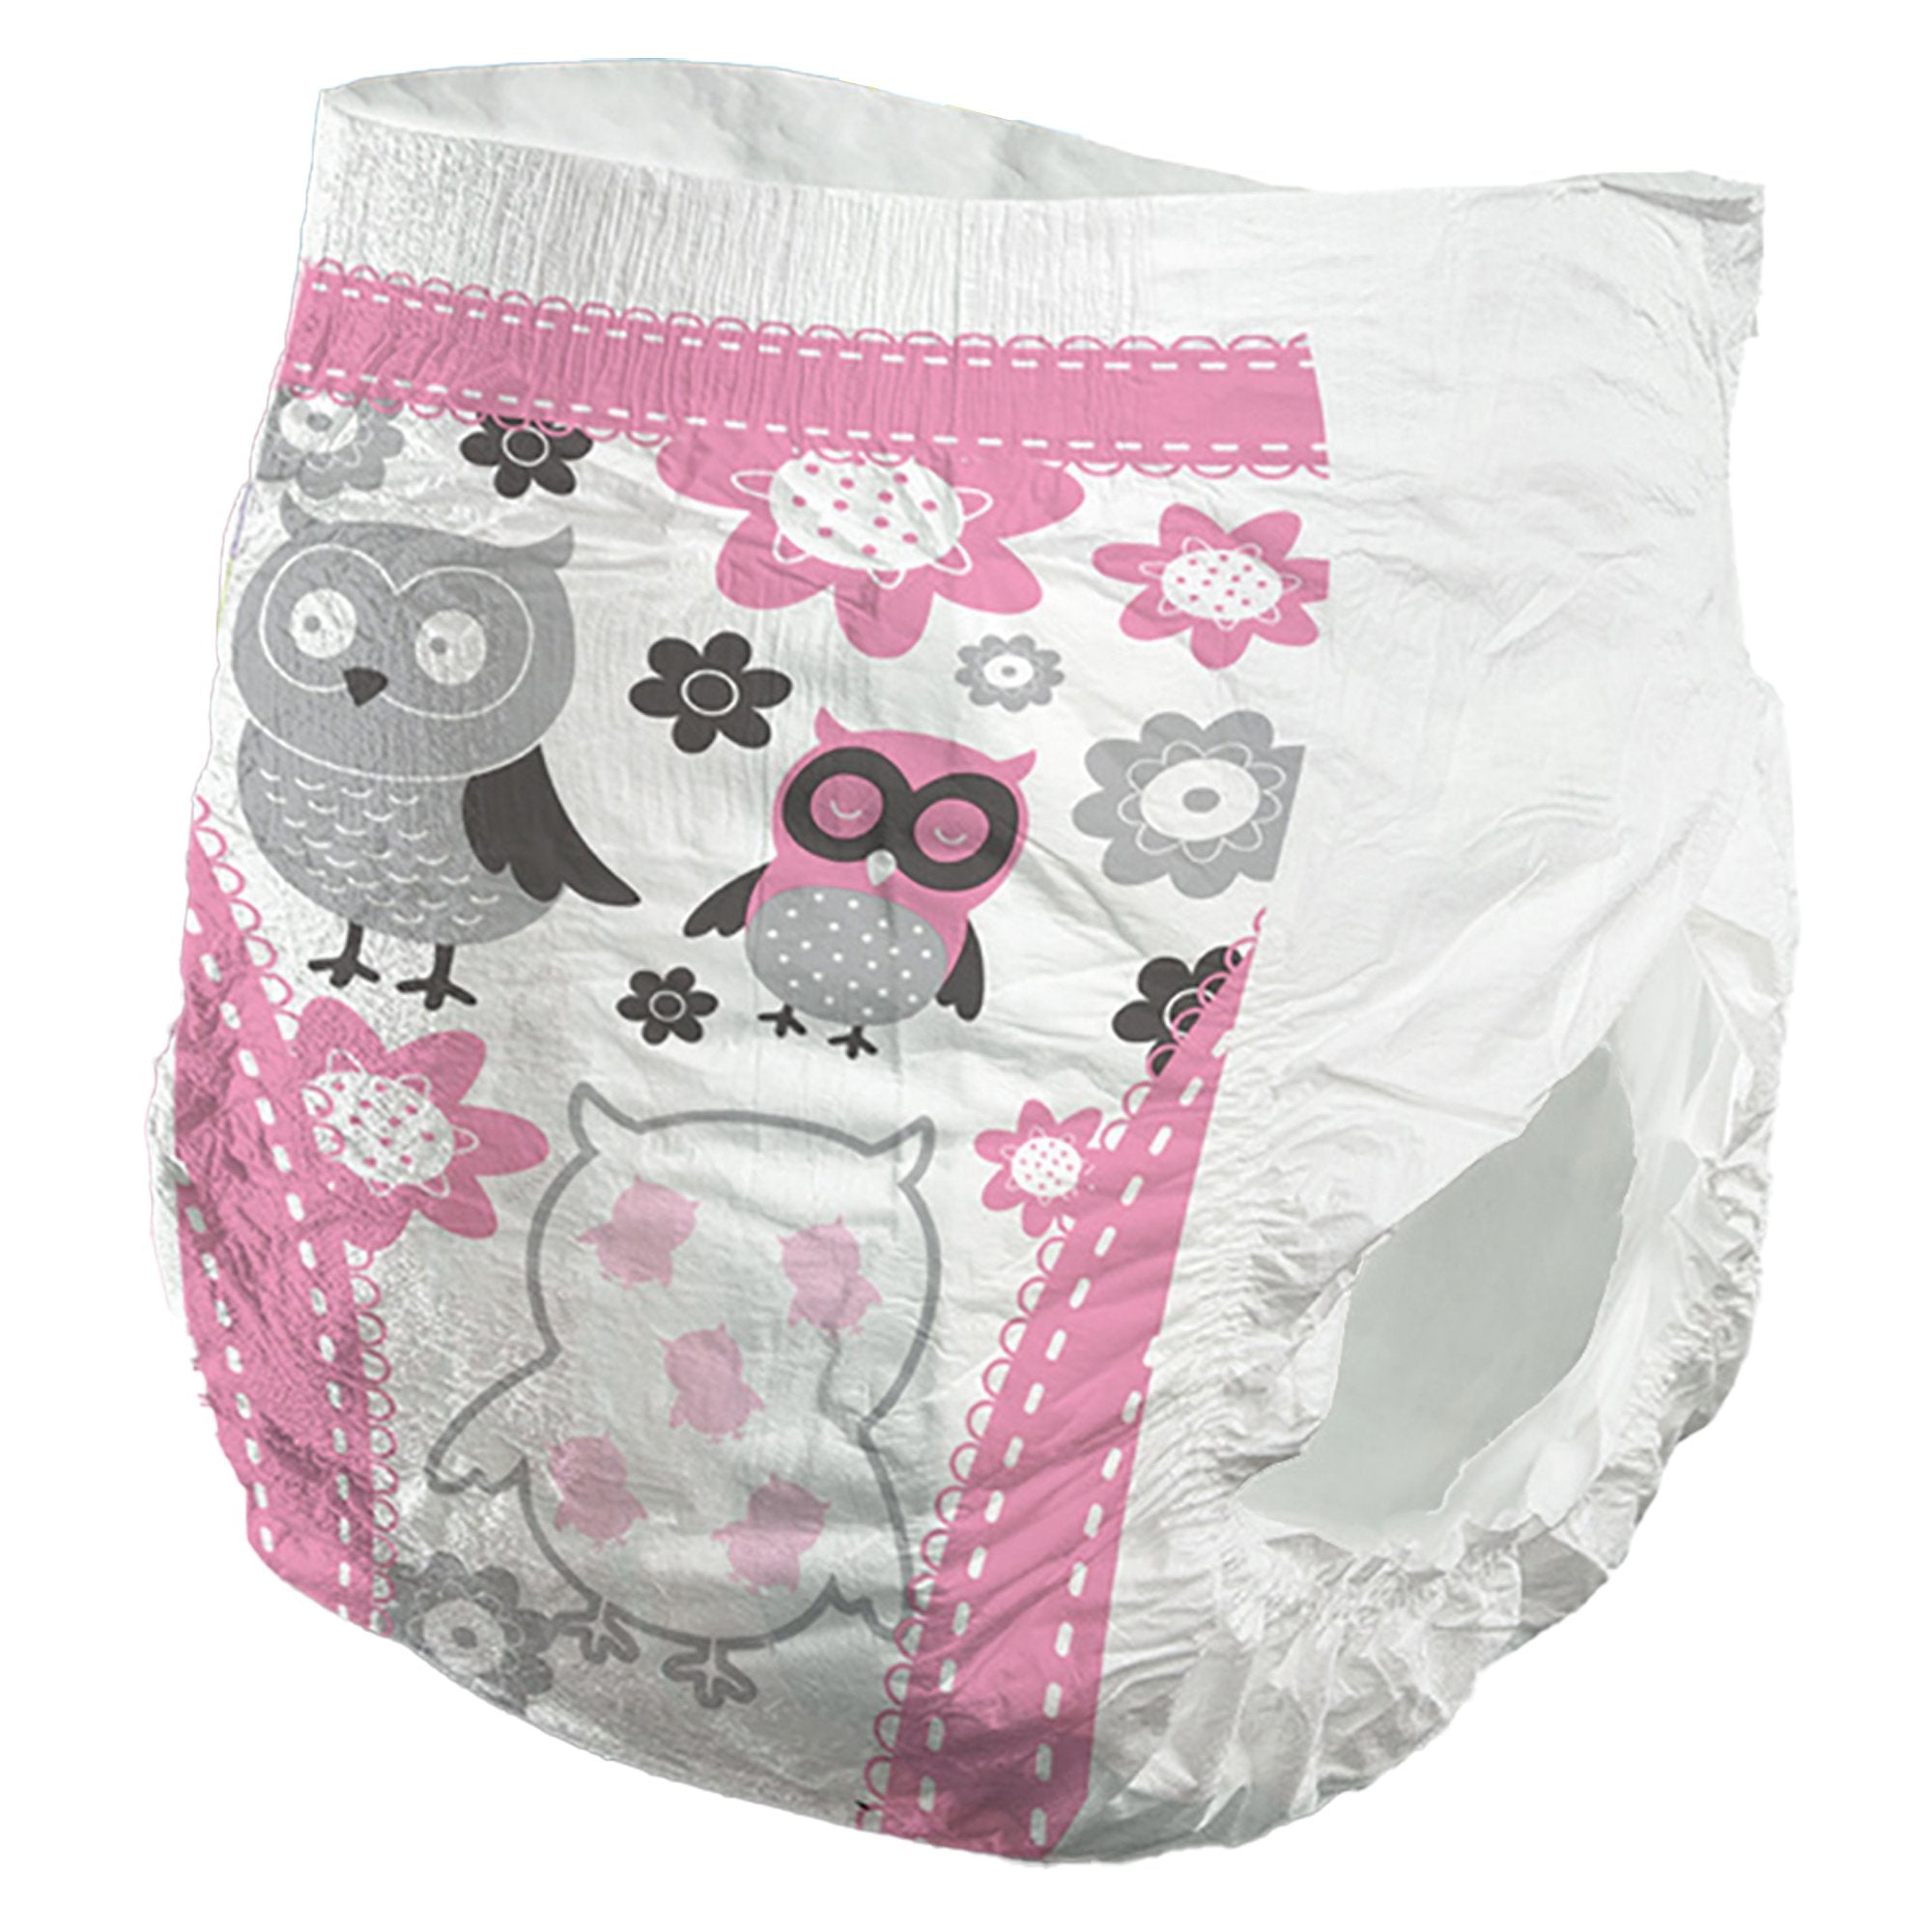 Female Toddler Training Pants Comfees Pull On with Tear Away Seams Size 3T to 4T Disposable Moderate Absorbency